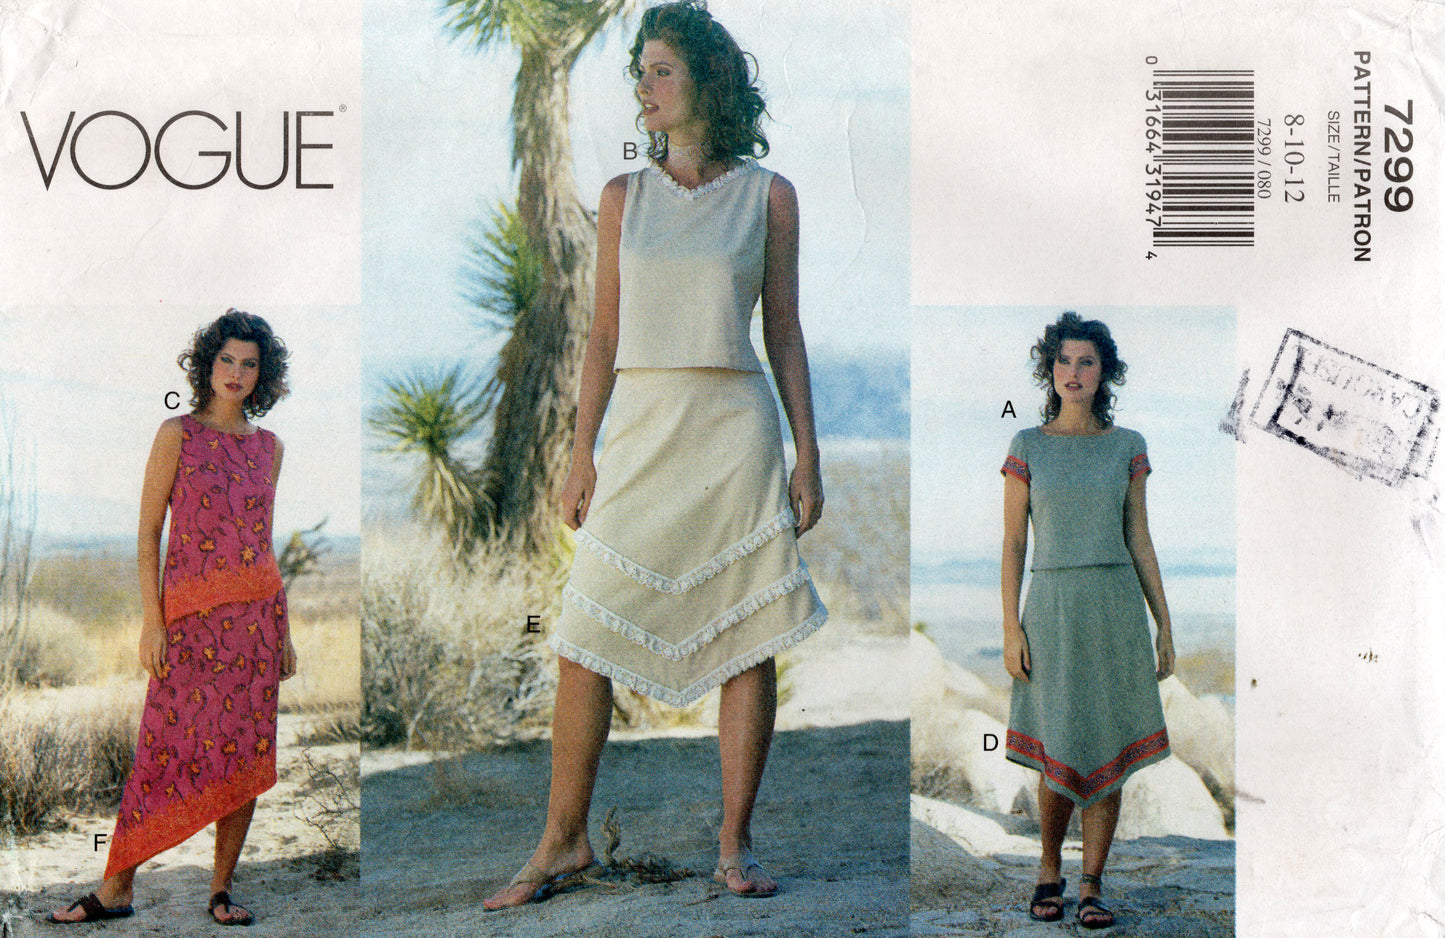 Vogue 7299 Womens Asymmetric Tops & Skirts Out Of Print Sewing Pattern Size 8 - 12 UNCUT Factory Folded